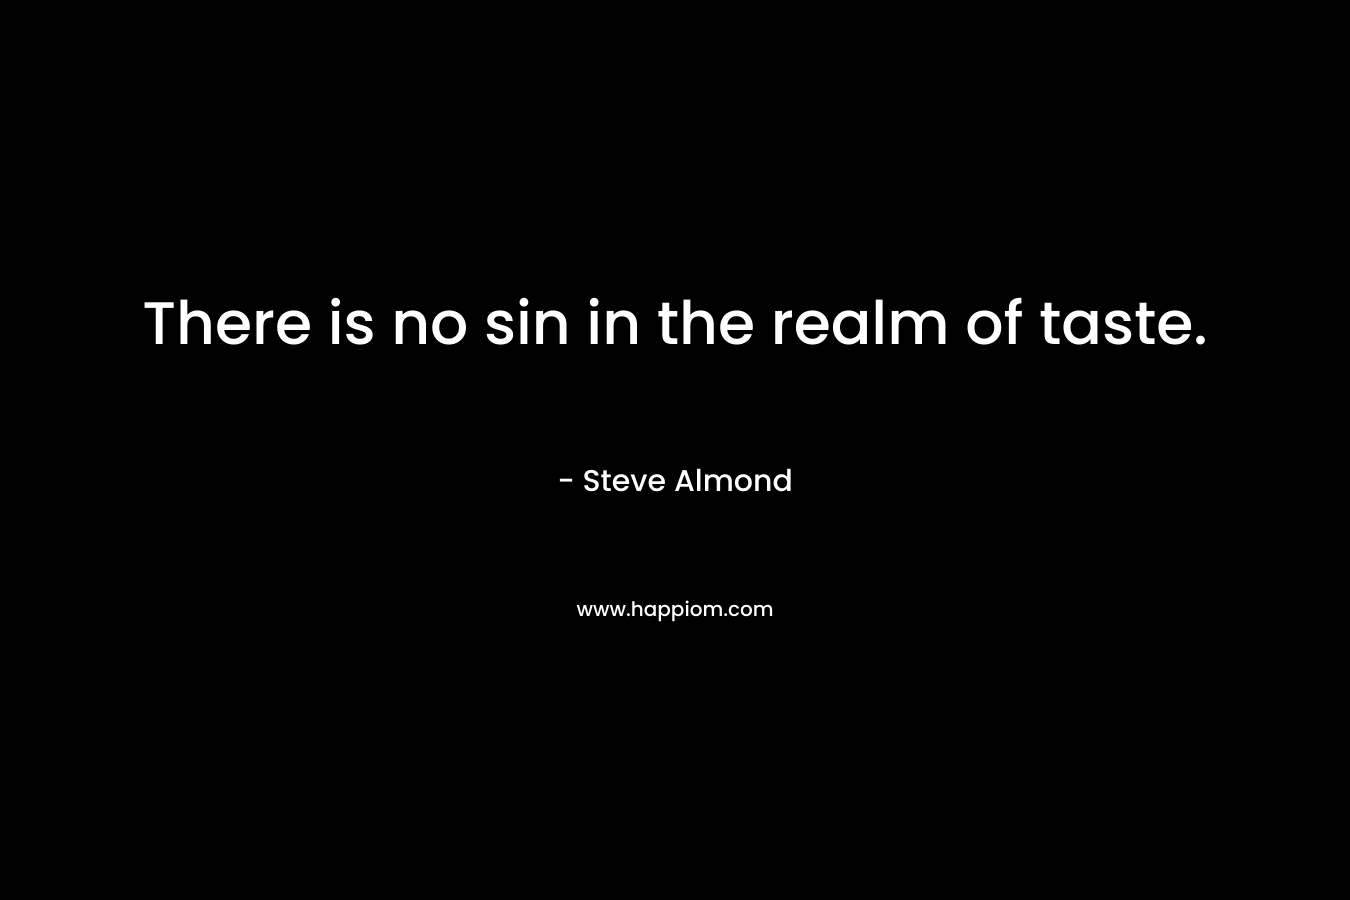 There is no sin in the realm of taste. – Steve Almond